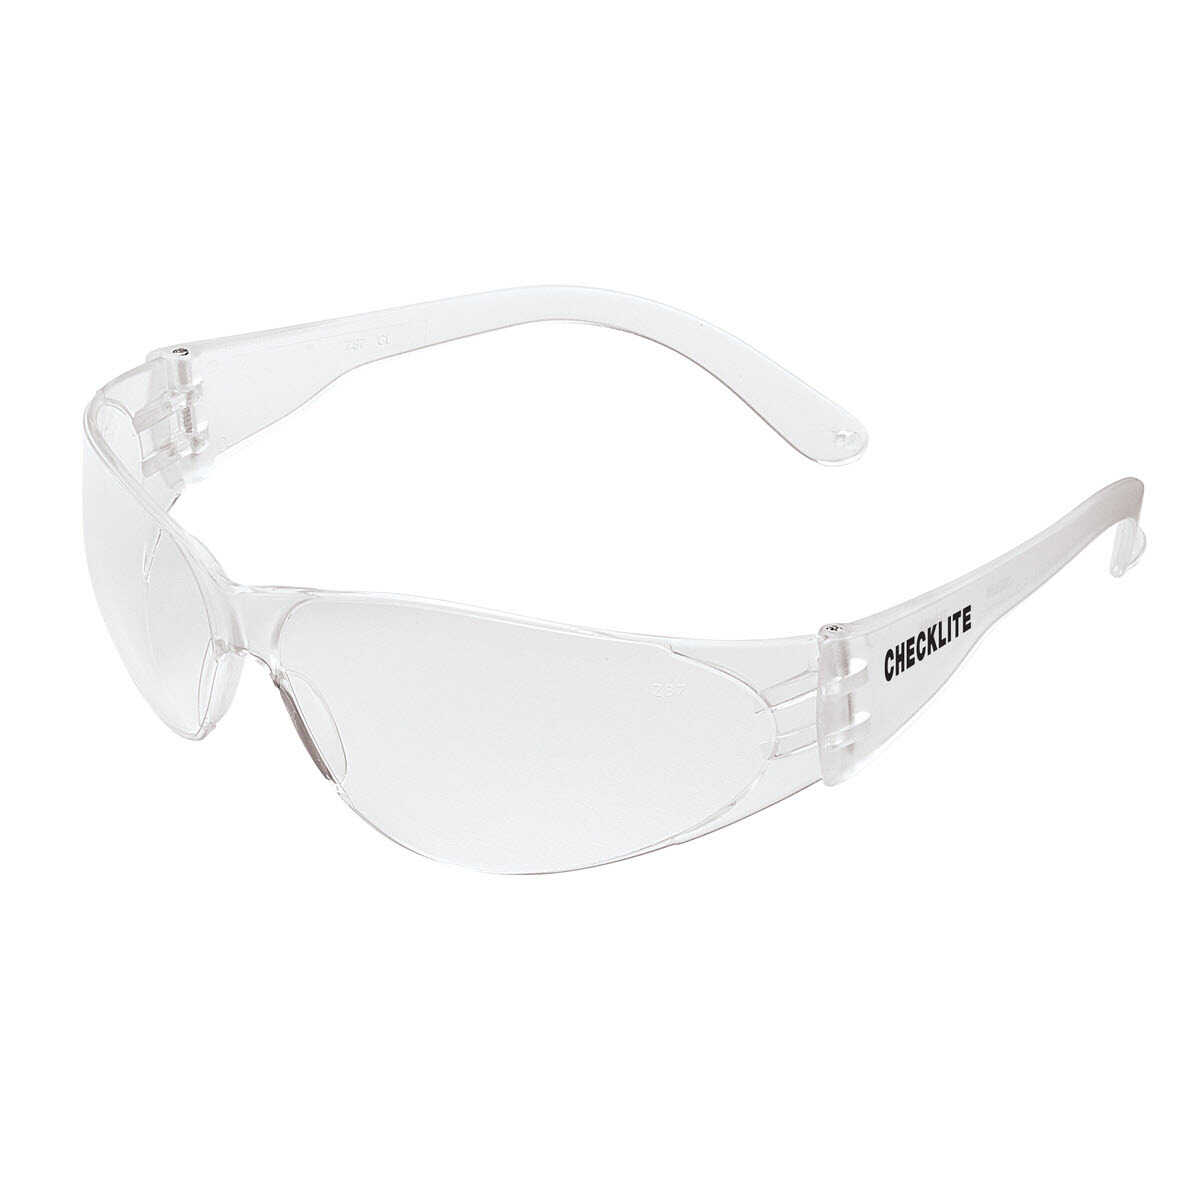 Checklite® CL1 Series Safety Glasses, Clear Temples and Lens